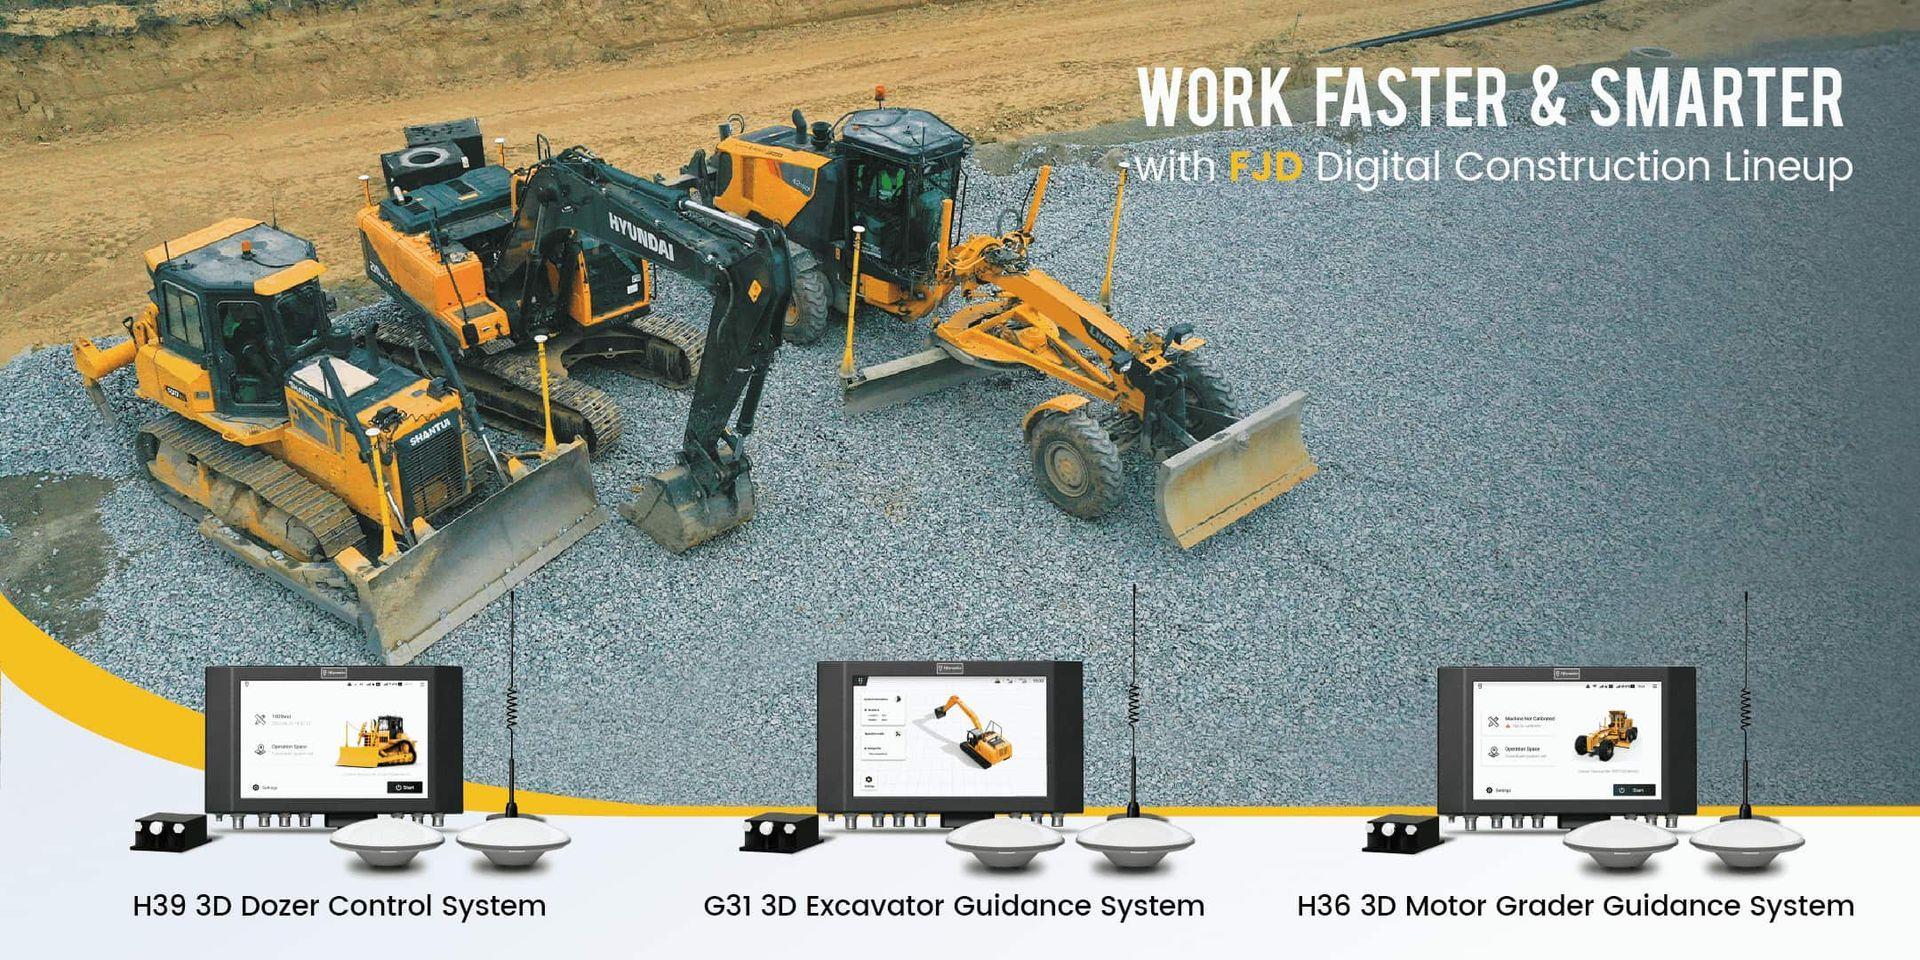 Each digital construction product represents how FJD provides advanced solutions for efficient construction operations, empowering workers to accomplish tasks more quickly and effectively. Leam More